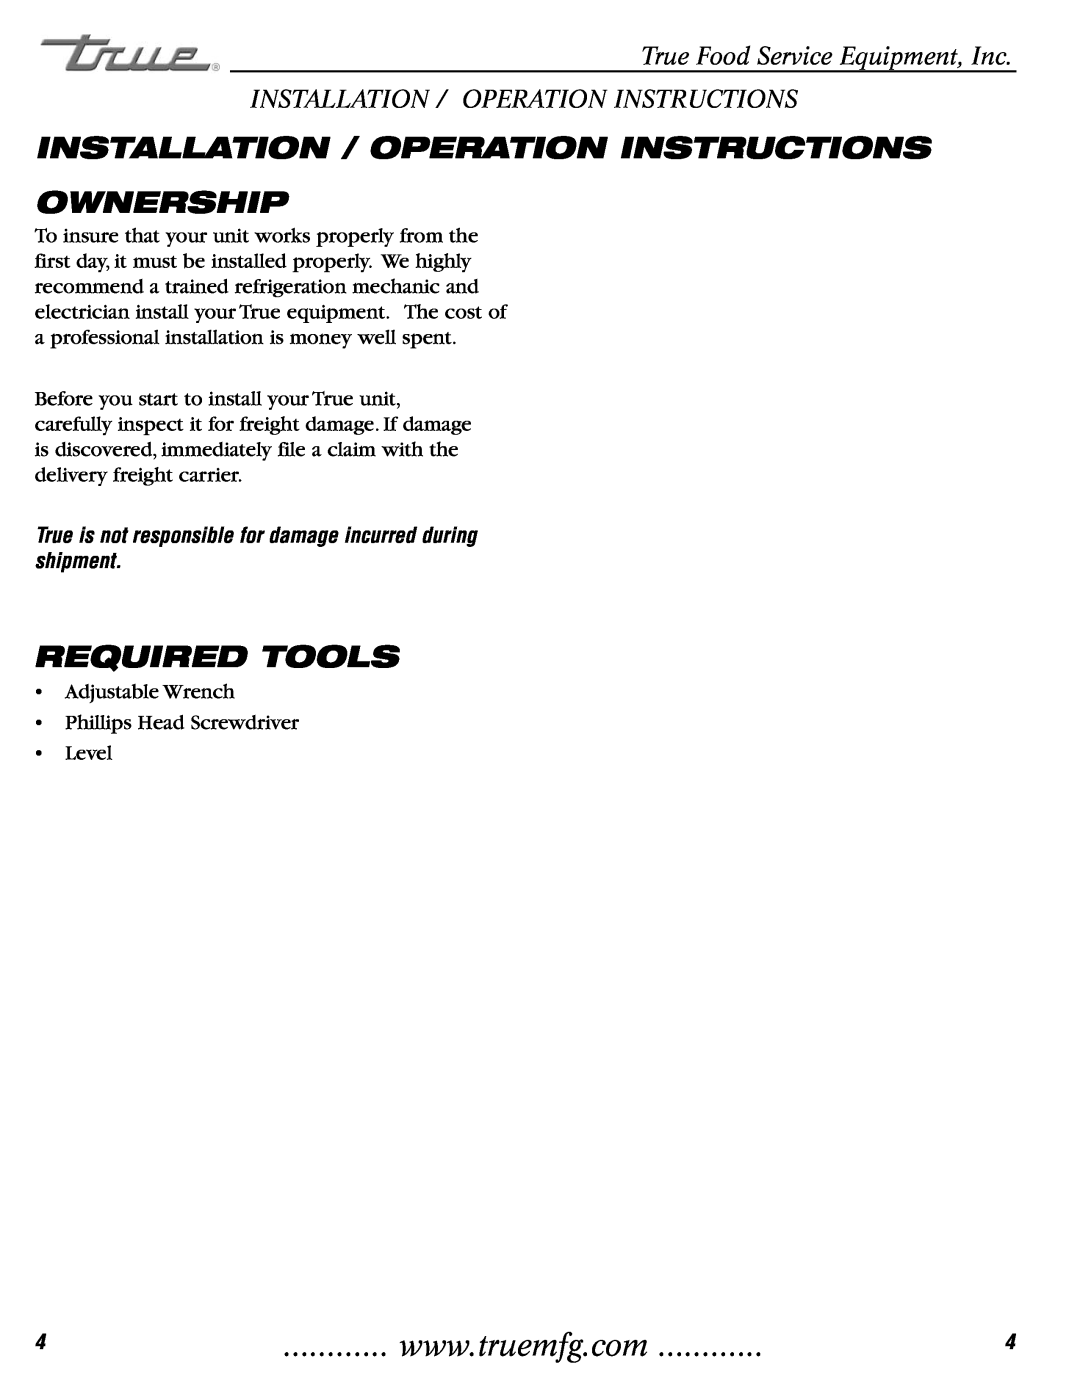 True Manufacturing Company GDM-3 installation manual Installation / Operation Instructions Ownership, Required Tools 